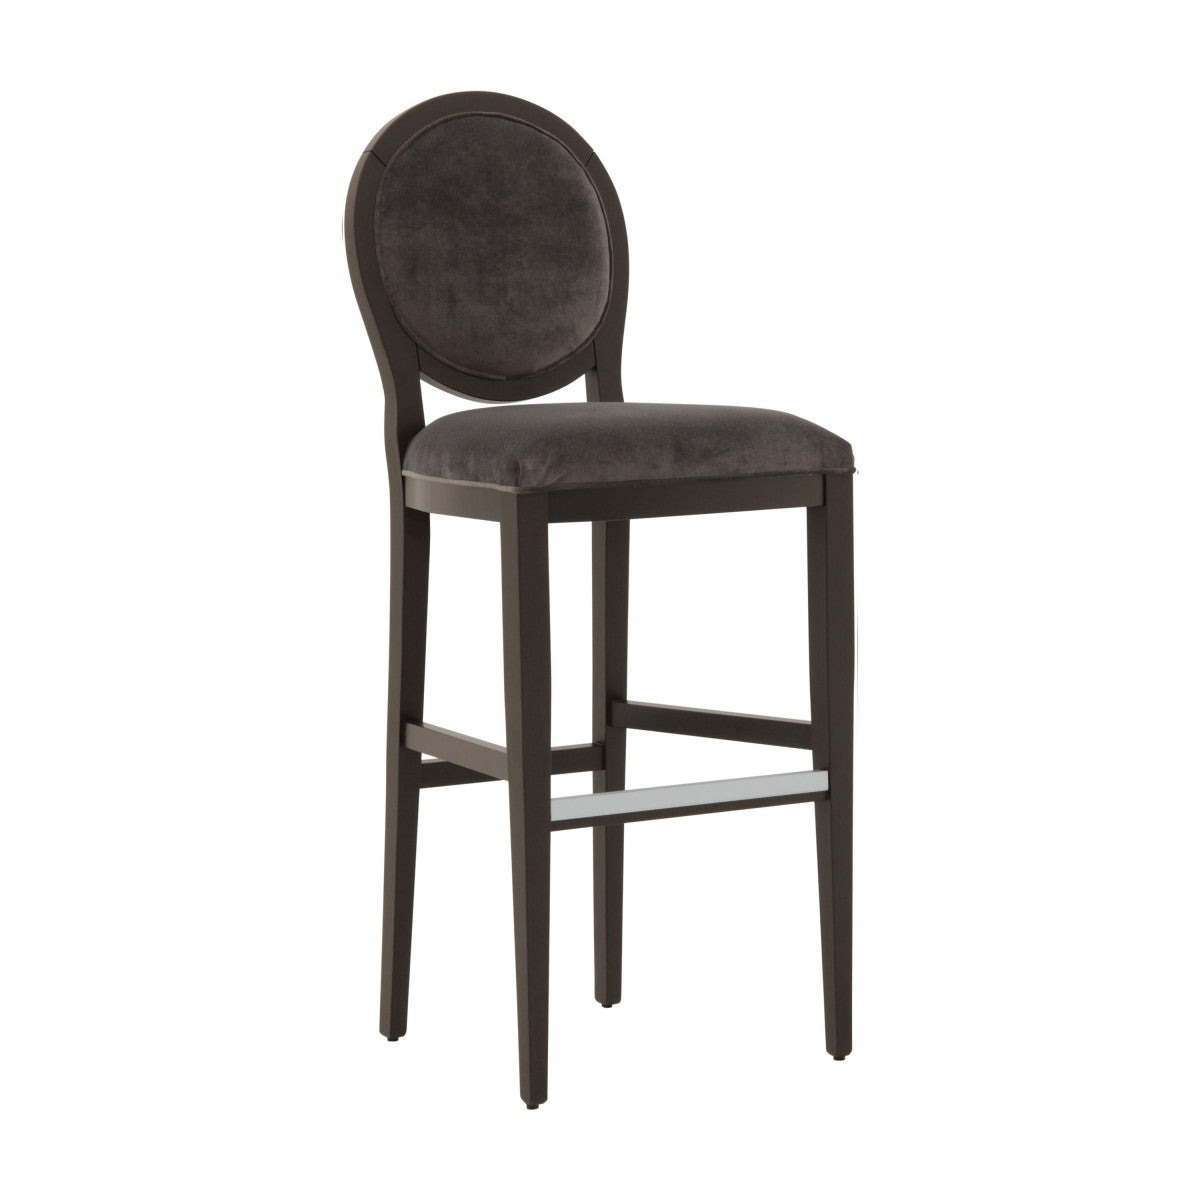 Anello Bespoke Upholstered Oval X Carved Back Kitchen Barstool MS319B Custom Made To Order